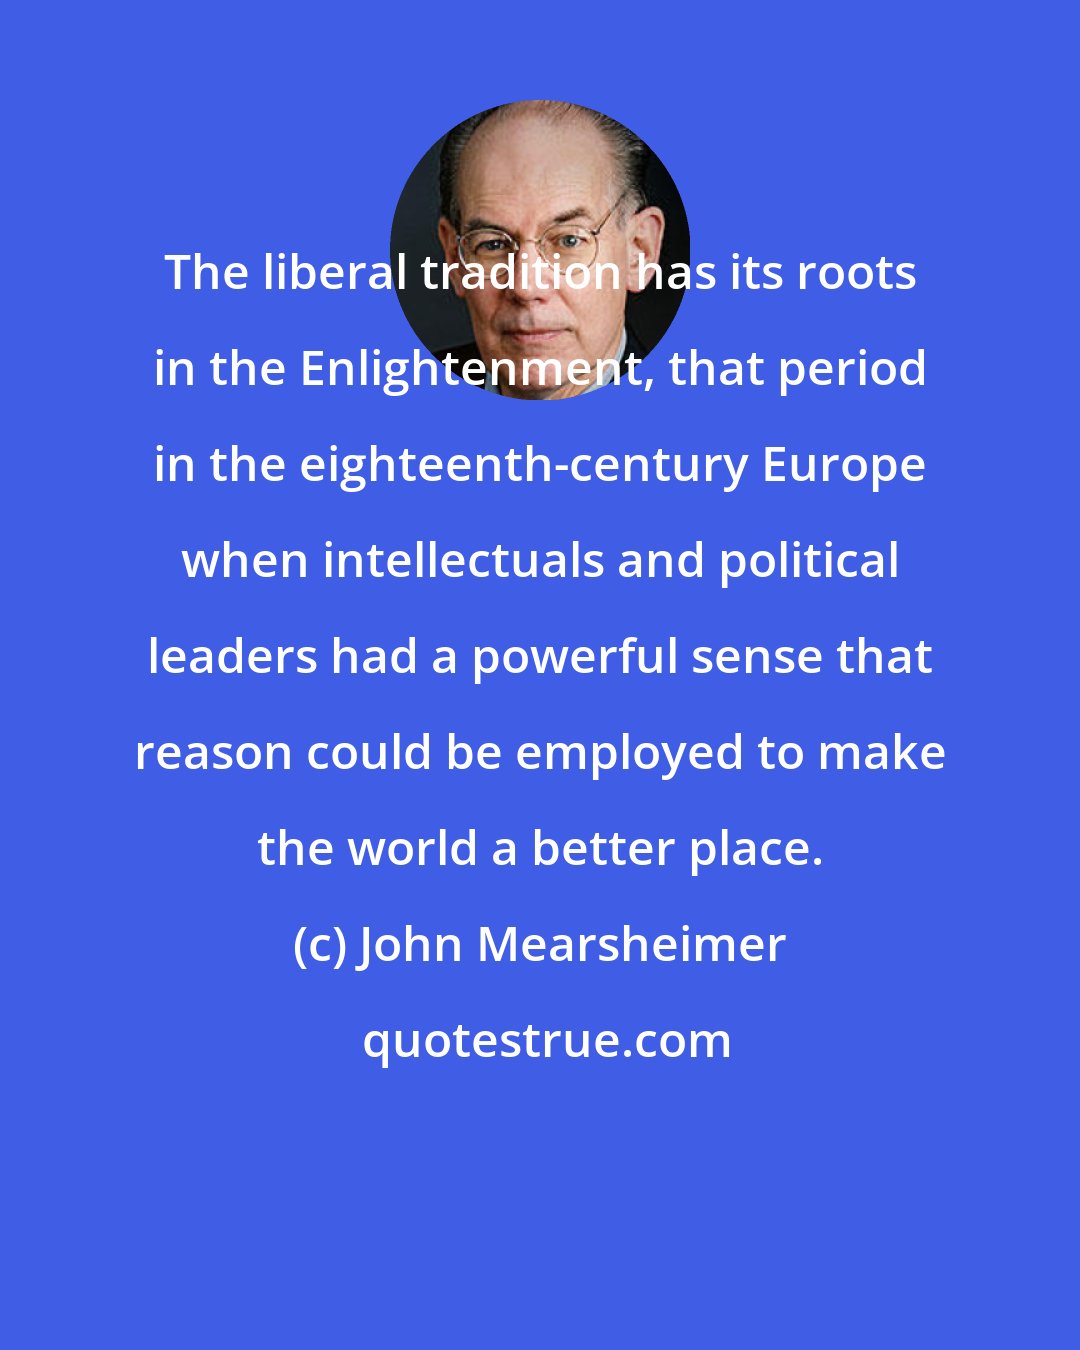 John Mearsheimer: The liberal tradition has its roots in the Enlightenment, that period in the eighteenth-century Europe when intellectuals and political leaders had a powerful sense that reason could be employed to make the world a better place.